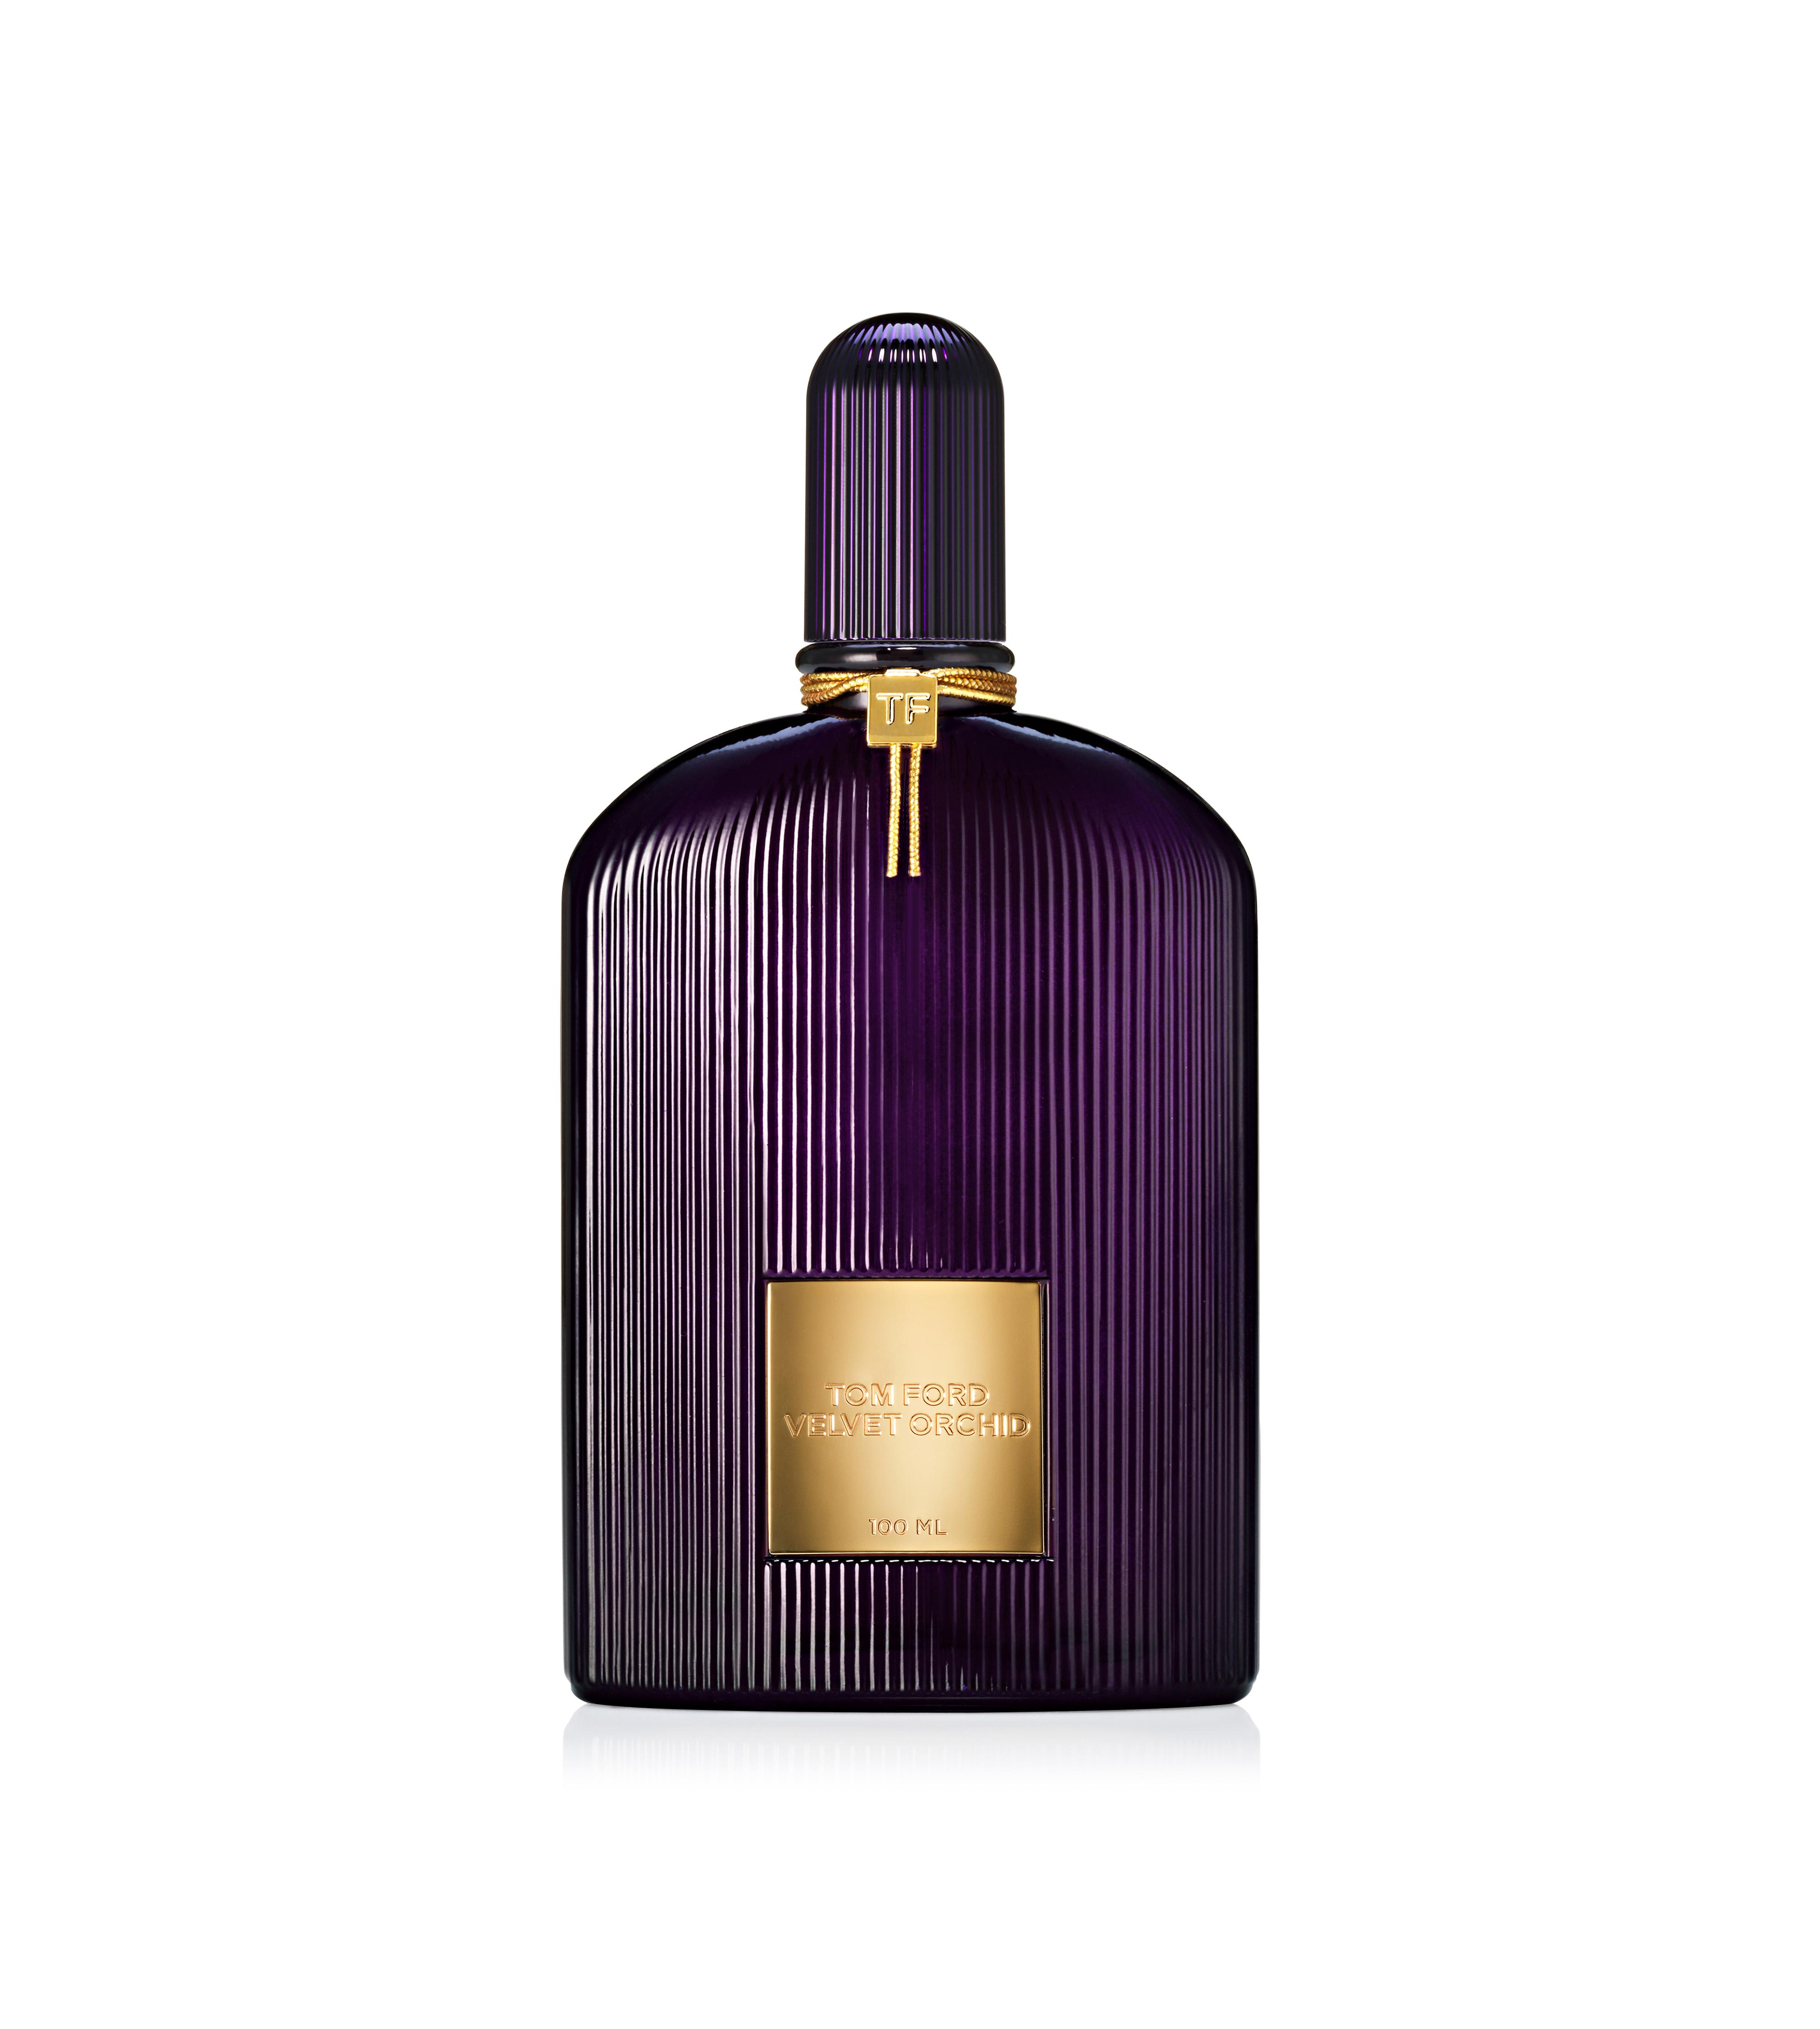 The Orchid Collection - Tom Ford Orchid Collection | TomFord.com